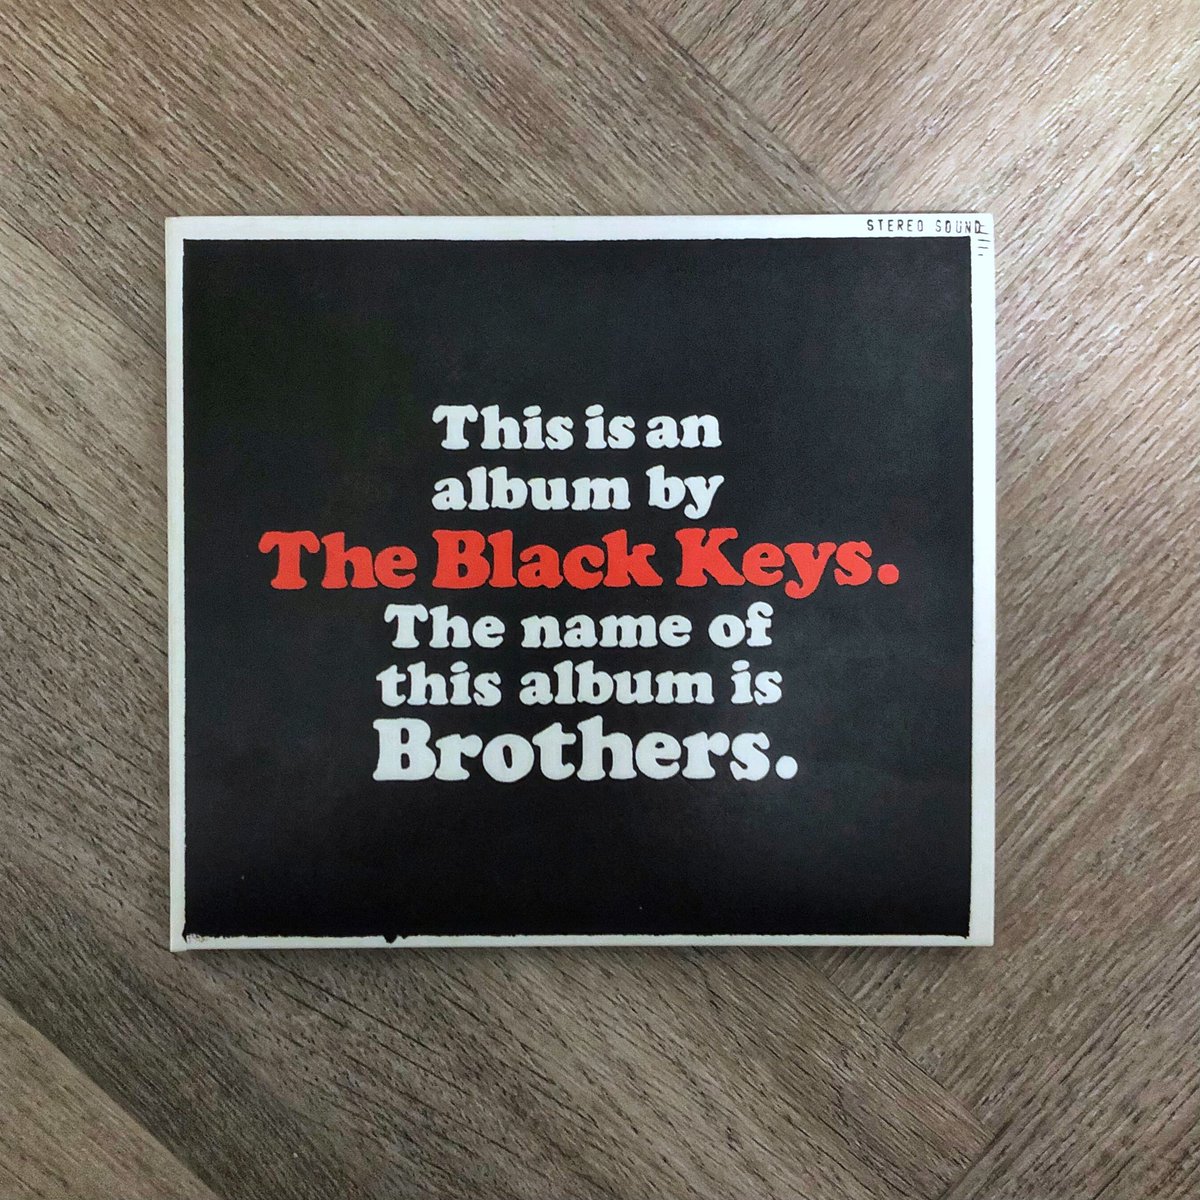 40.Black KeysBrothersTitle symbolises how in tune they are with each other. It’s a swampy but polished LP, Muscle Shoals. The progress in sound is insane & they knew they were at a peak (by including too many tracks, only criticism) #AtoZMusicChallenge #AtoZMusicCollection